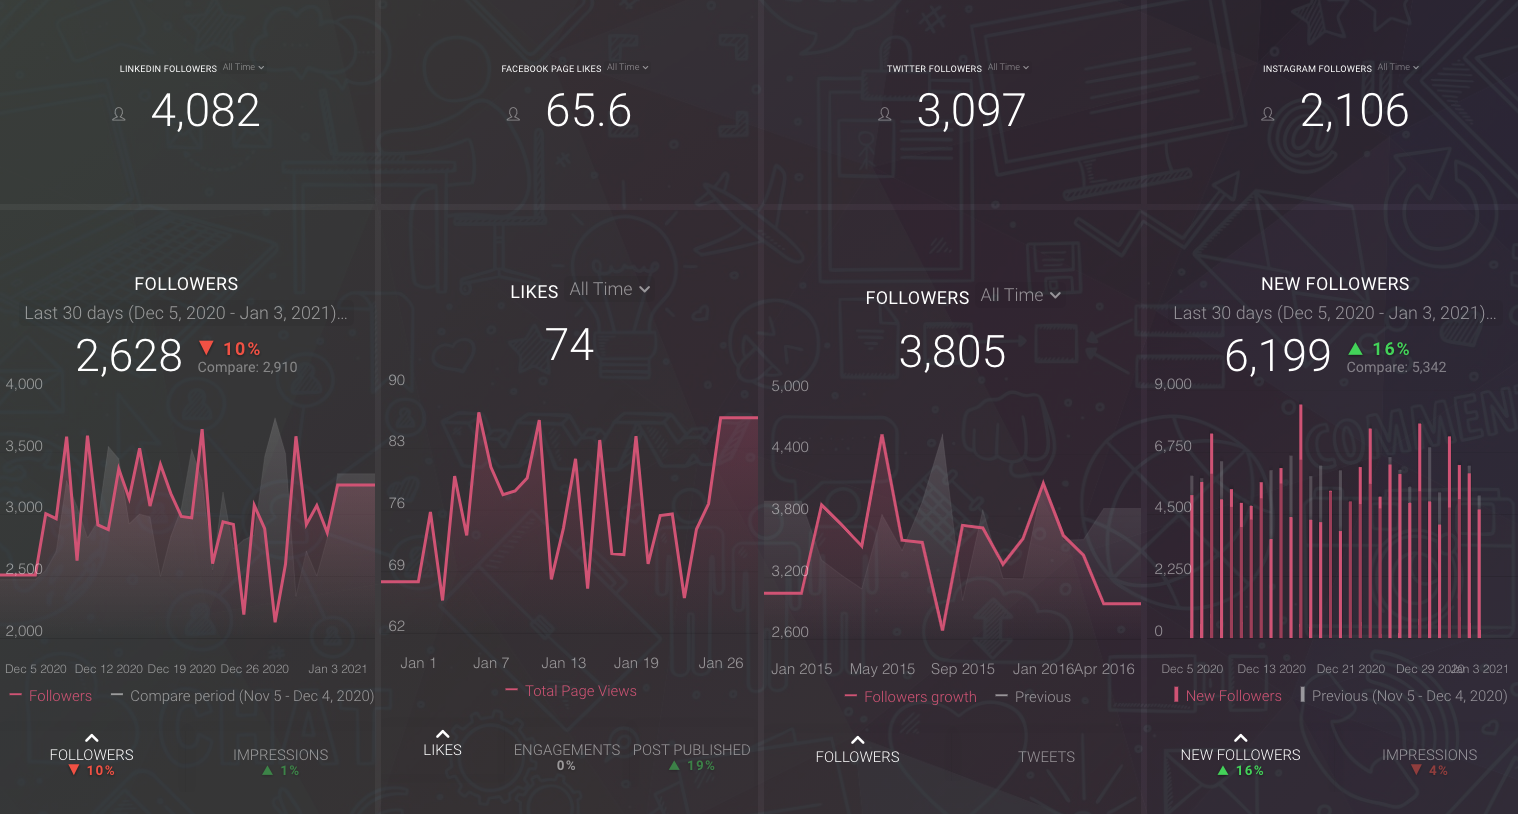 Social Networks overview dashboard